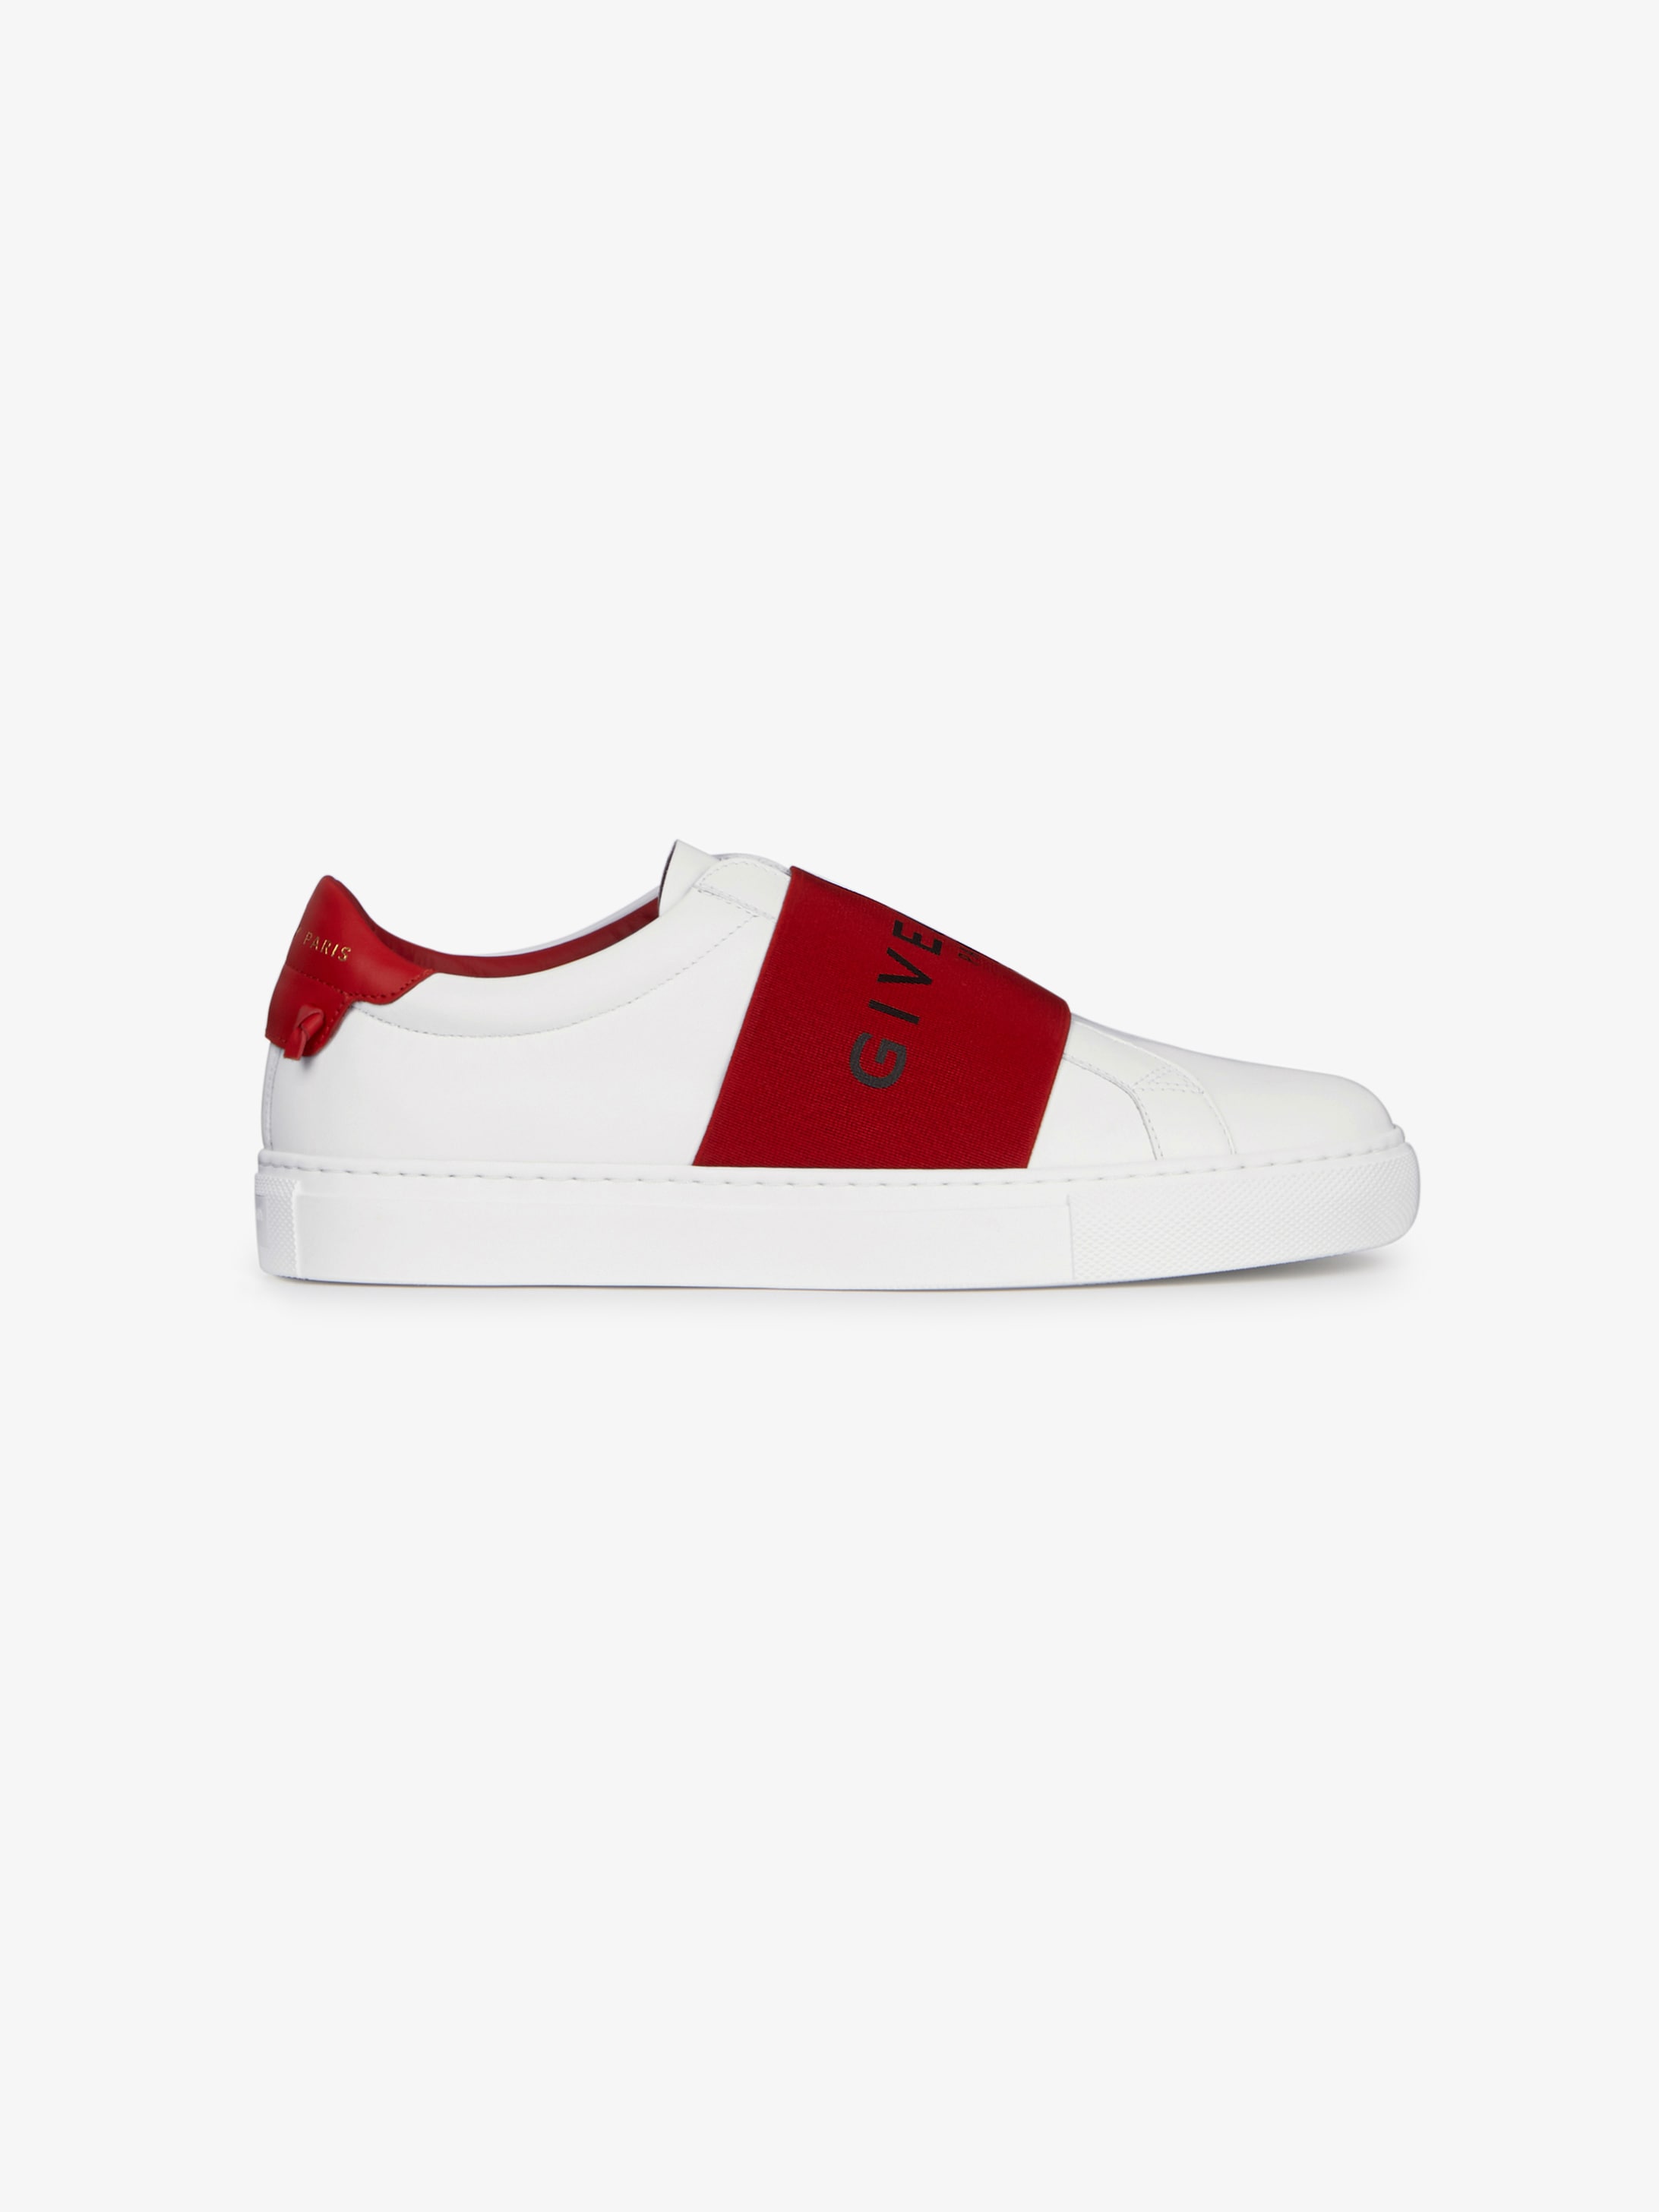 givenchy paris sneakers